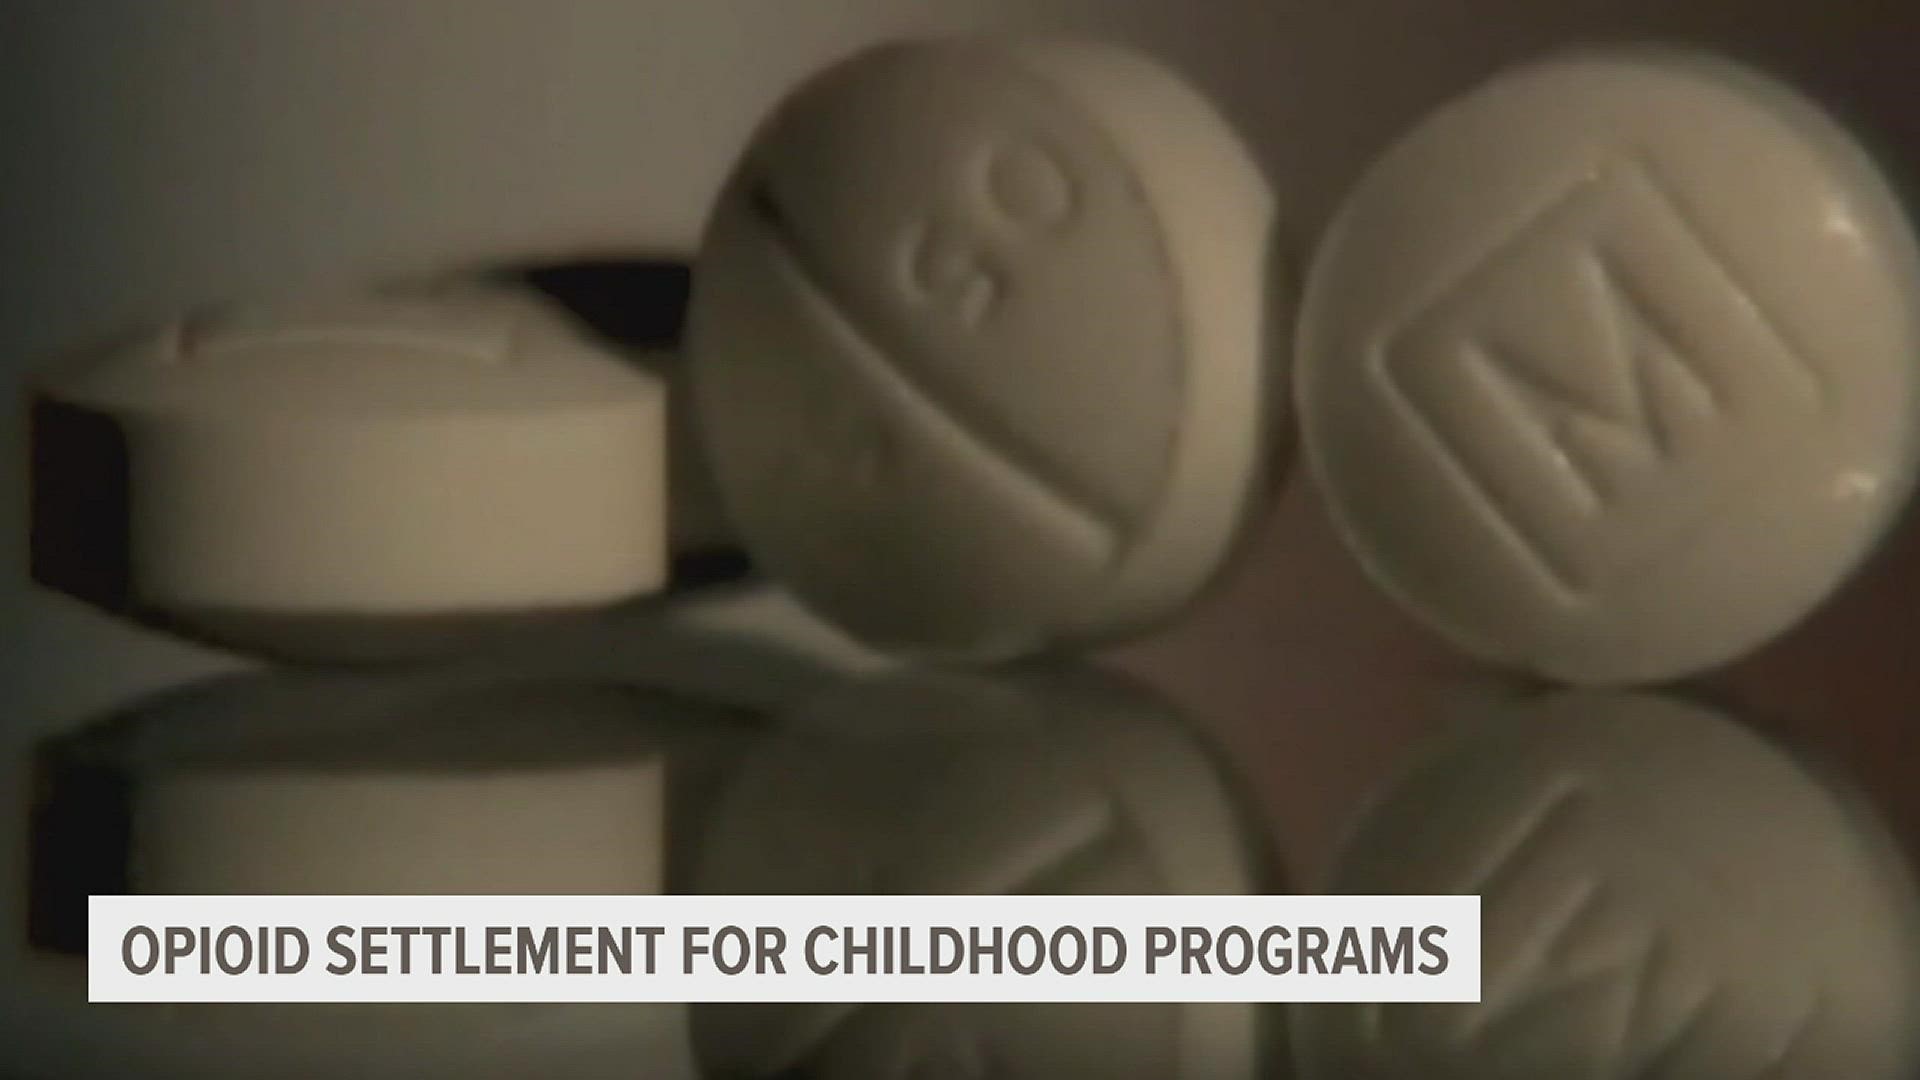 Lawmakers say that using the money to fund early childhood initiatives will help the youngest victims of the opioid epidemic.